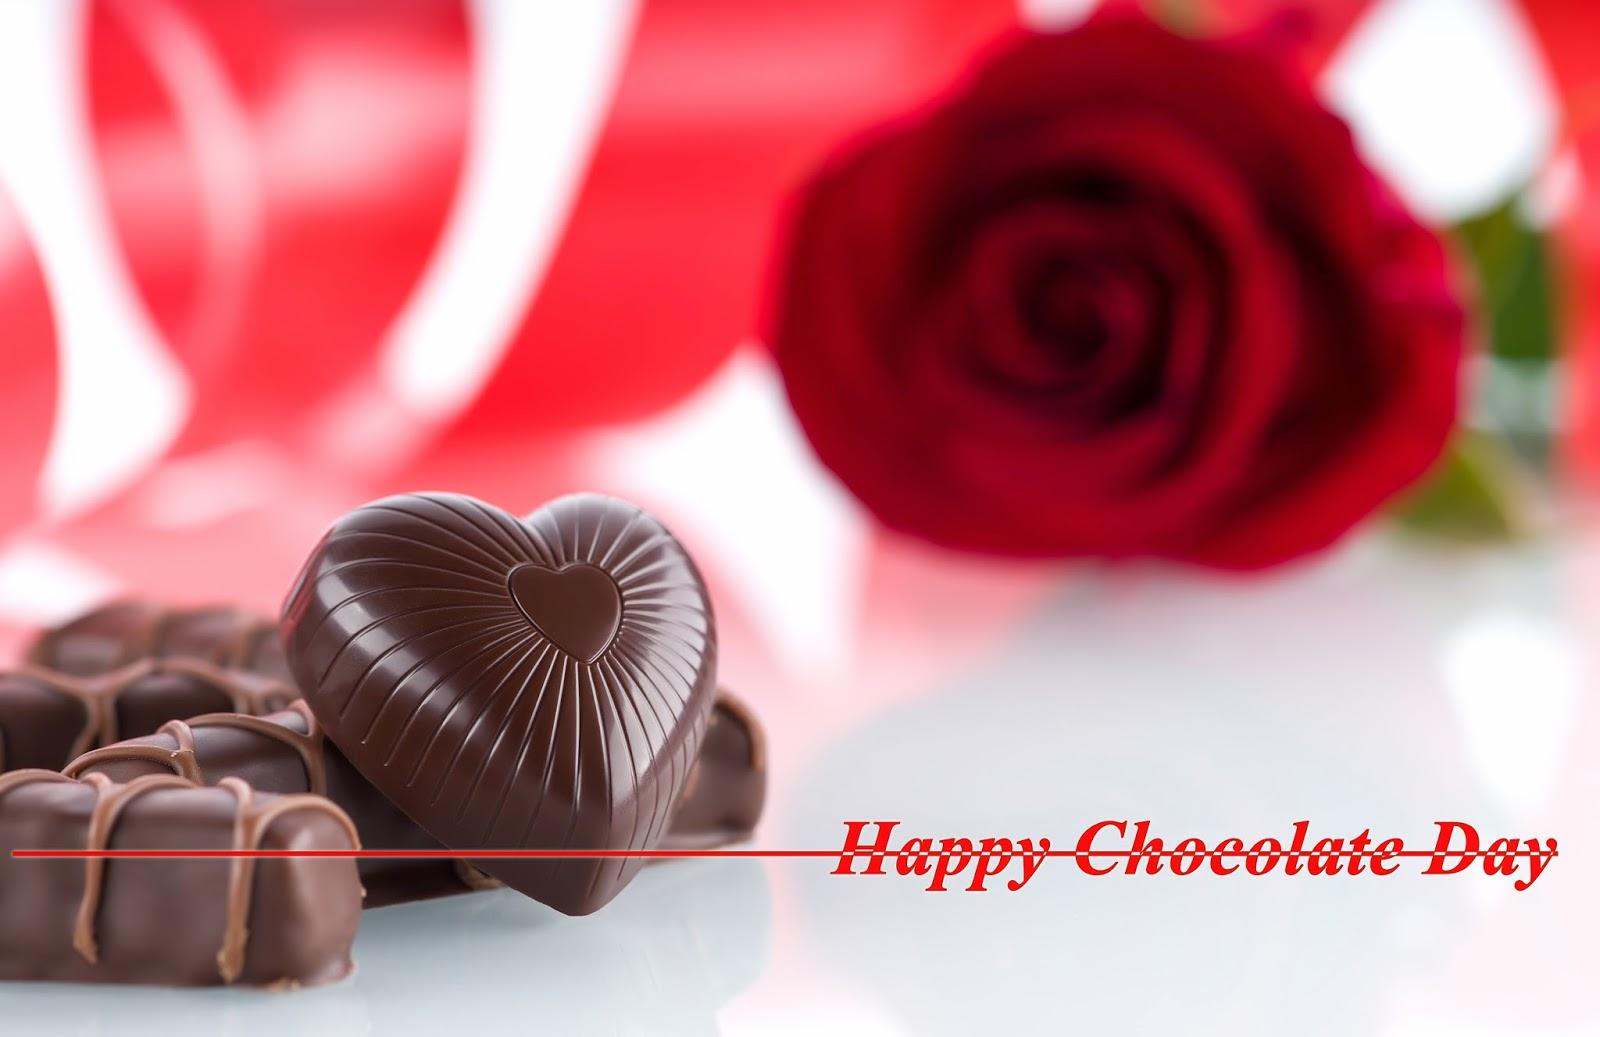 Happy Chocolate Day Wallpaper HD Chocolate Day 2016